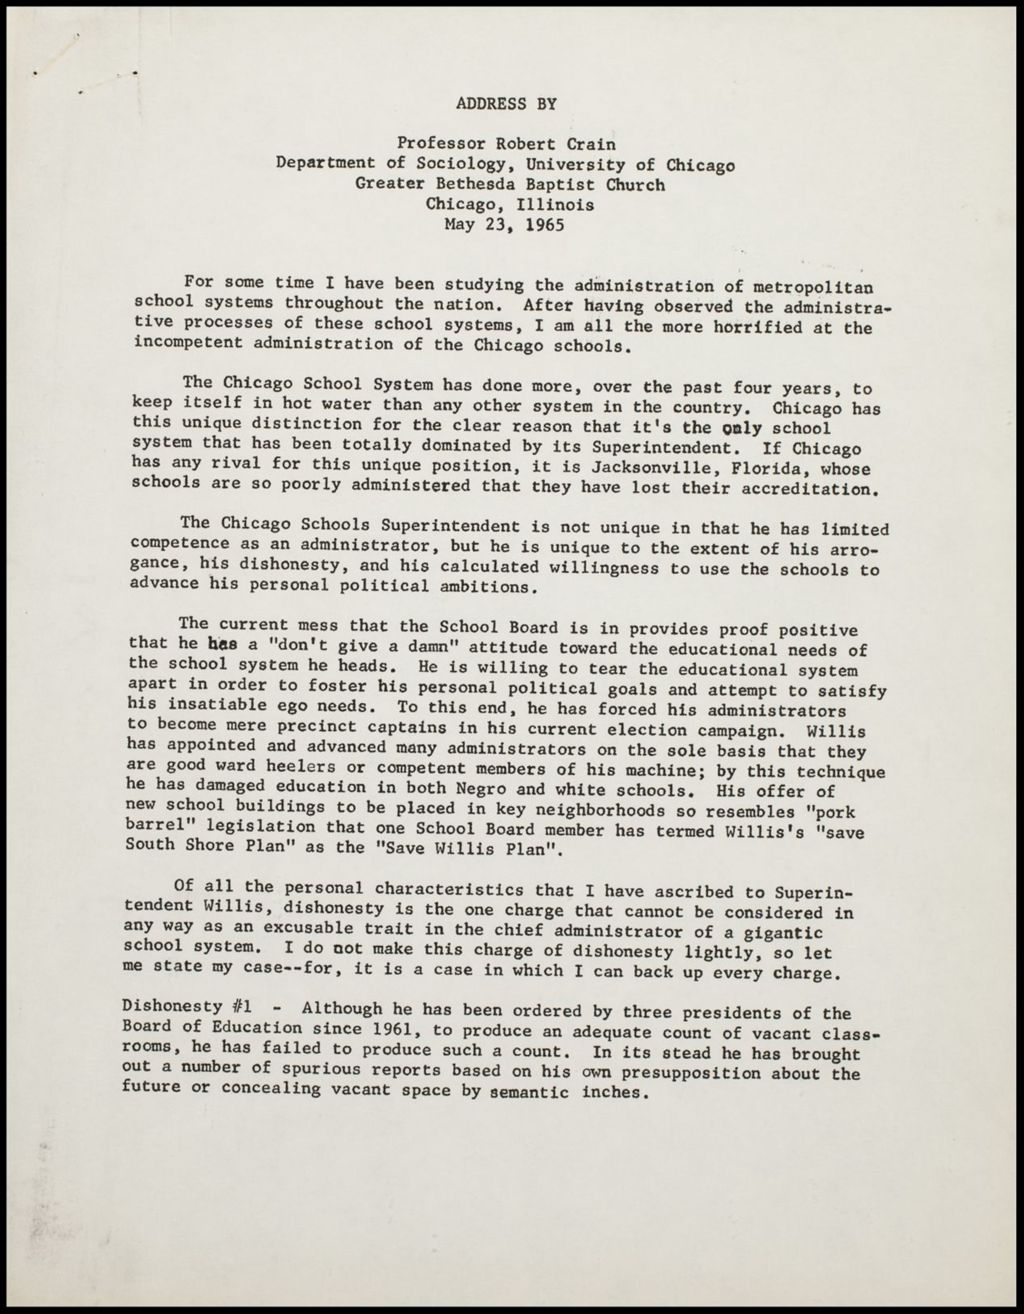 Miniature of Papers on Policy Making, 1964 (Folder III-2471)